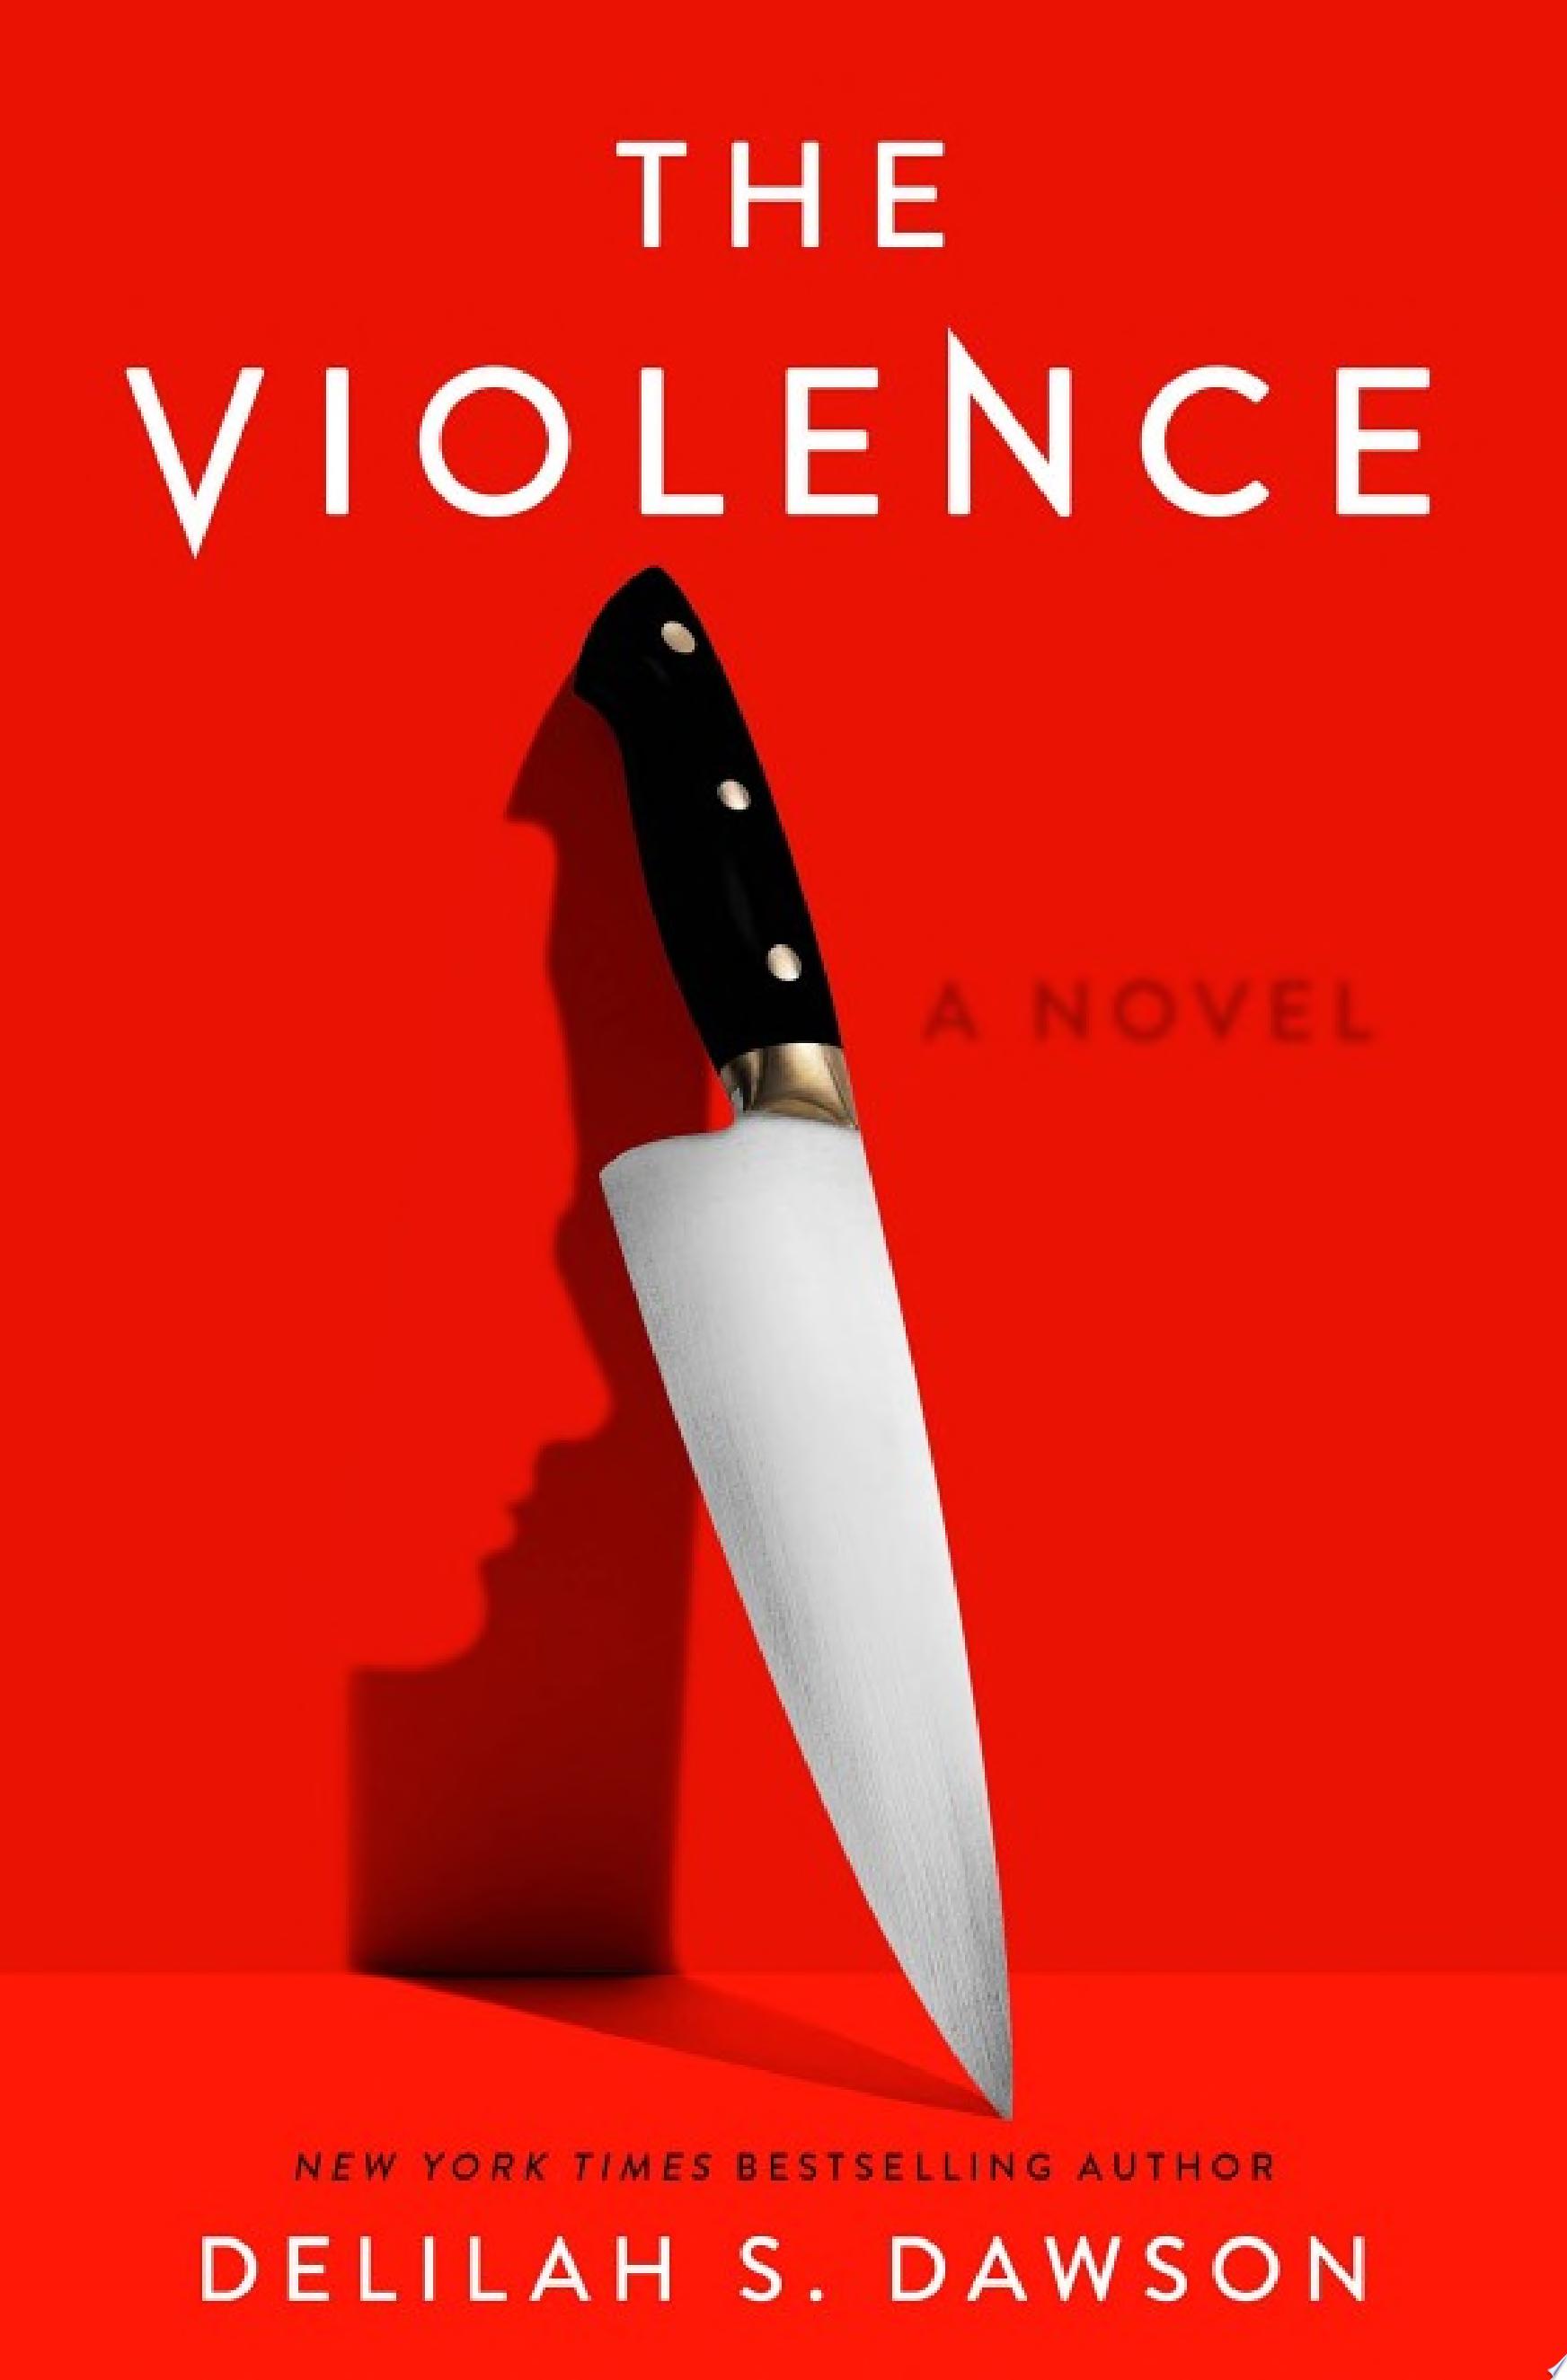 Image for "The Violence"